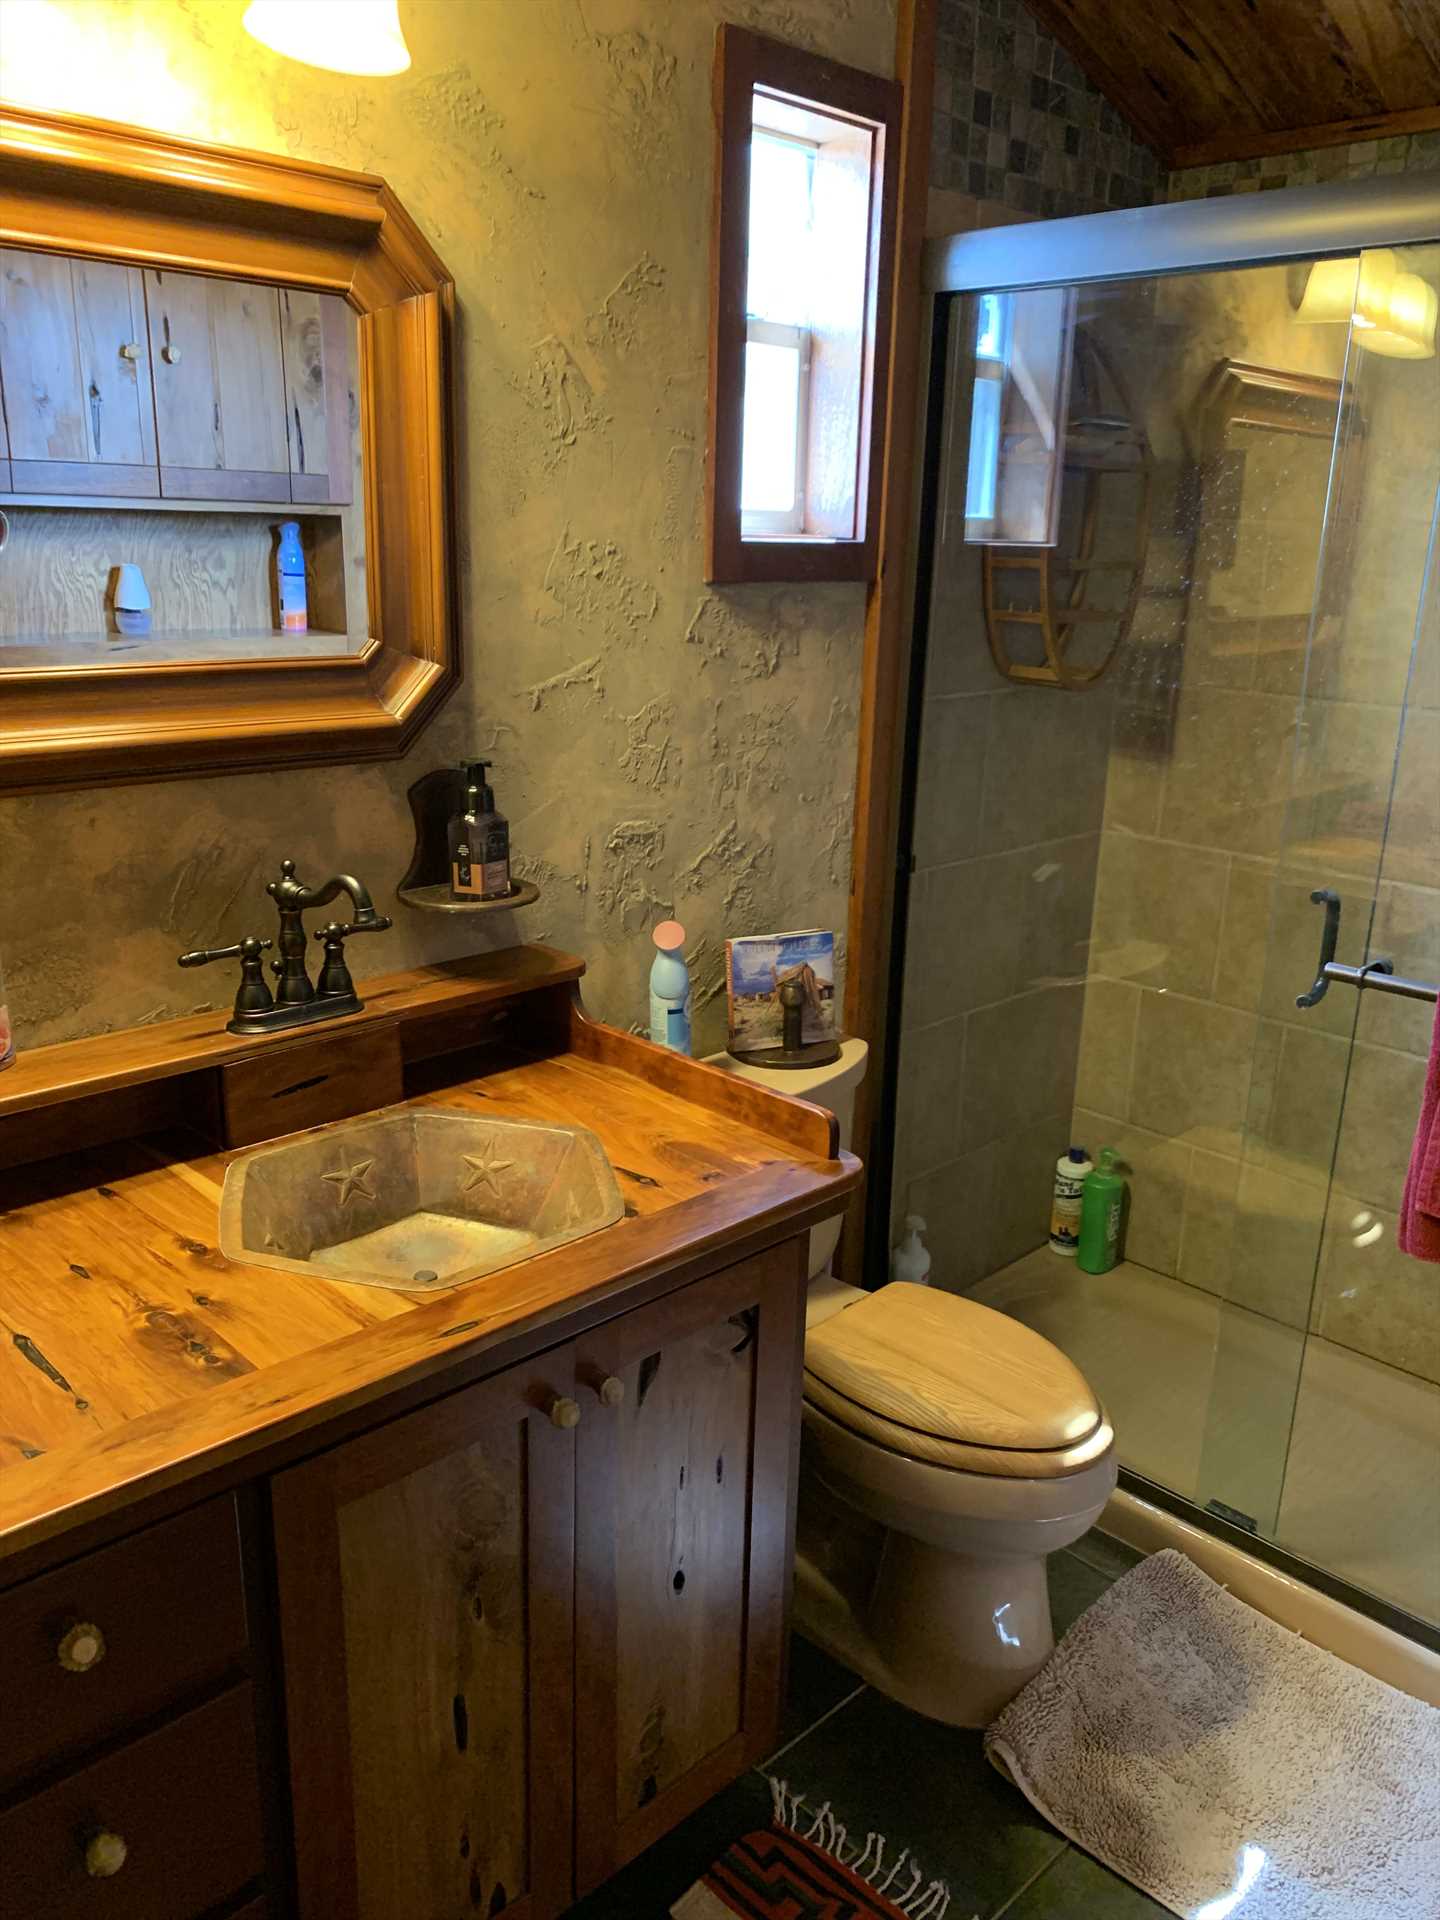                                                 The full bath features a shower stall, unique wood-accented vanity, and plenty of fluffy and clean linens.